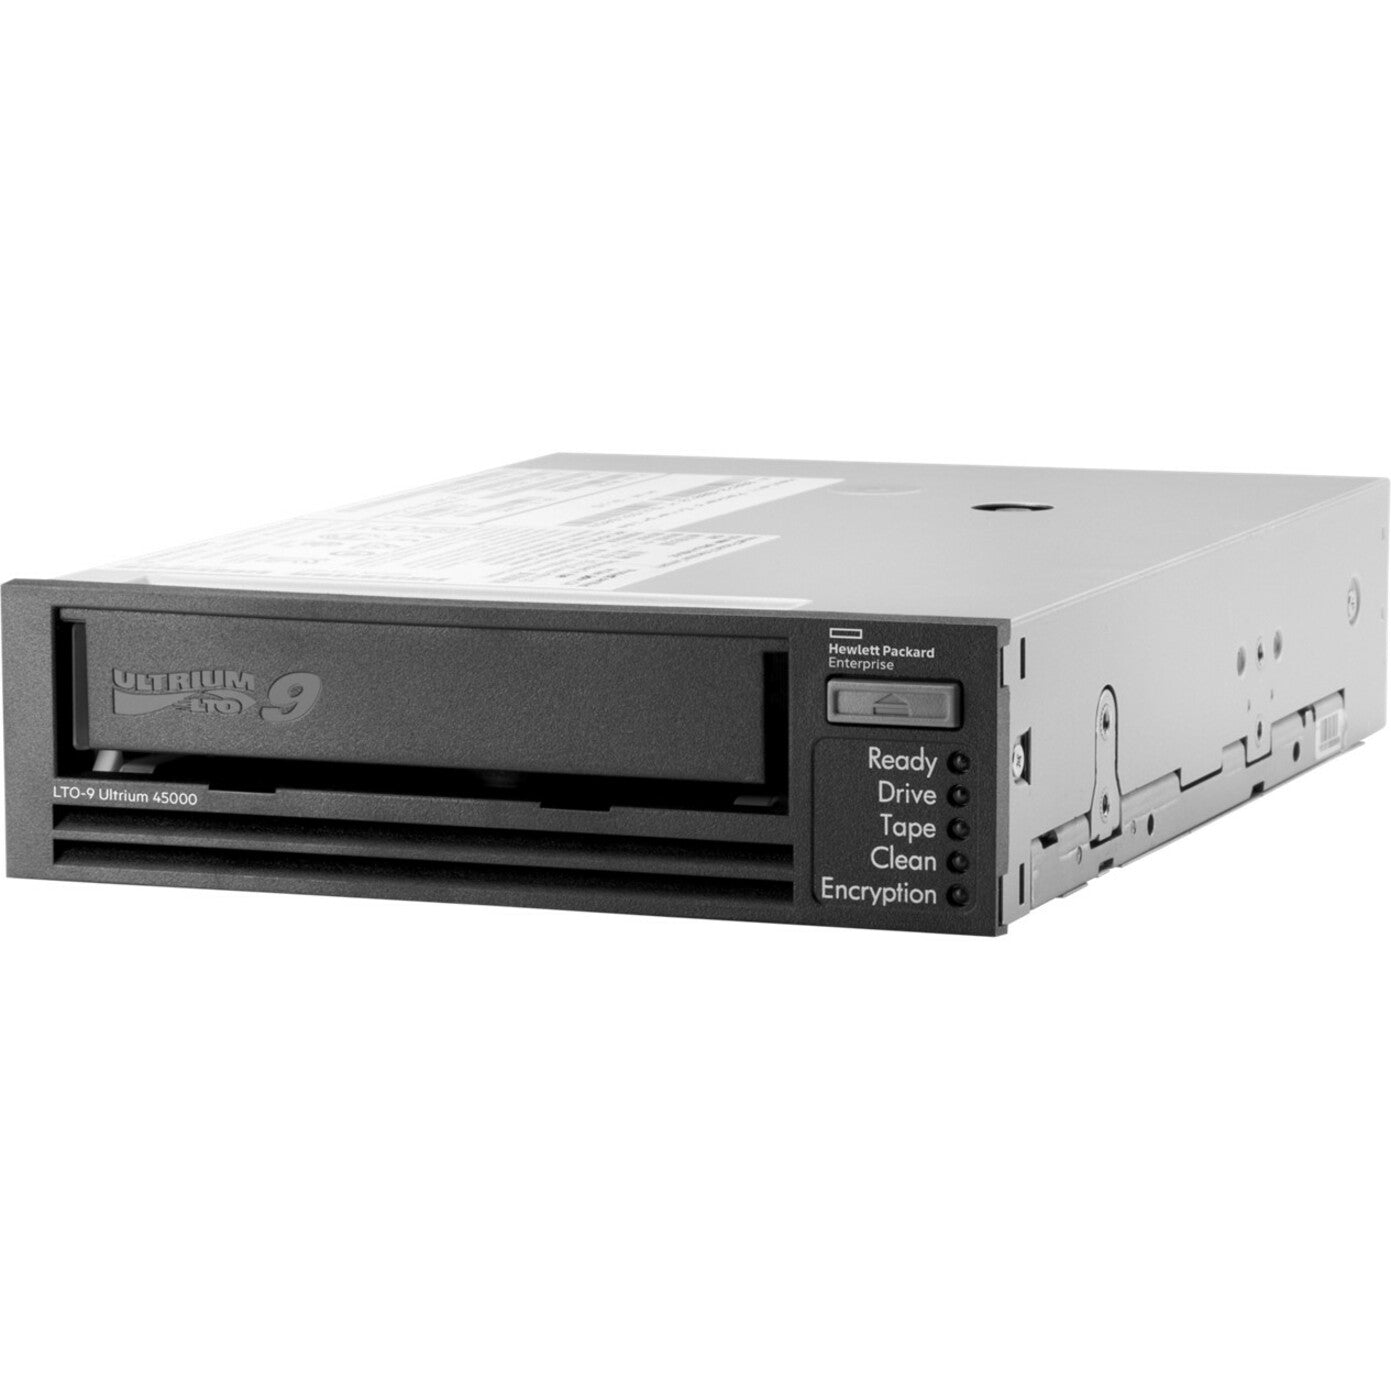 HPE BC040A StoreEver LTO-9 Ultrium 45000 Internal Tape Drive, 18TB Native Capacity, 45TB Compressed Capacity